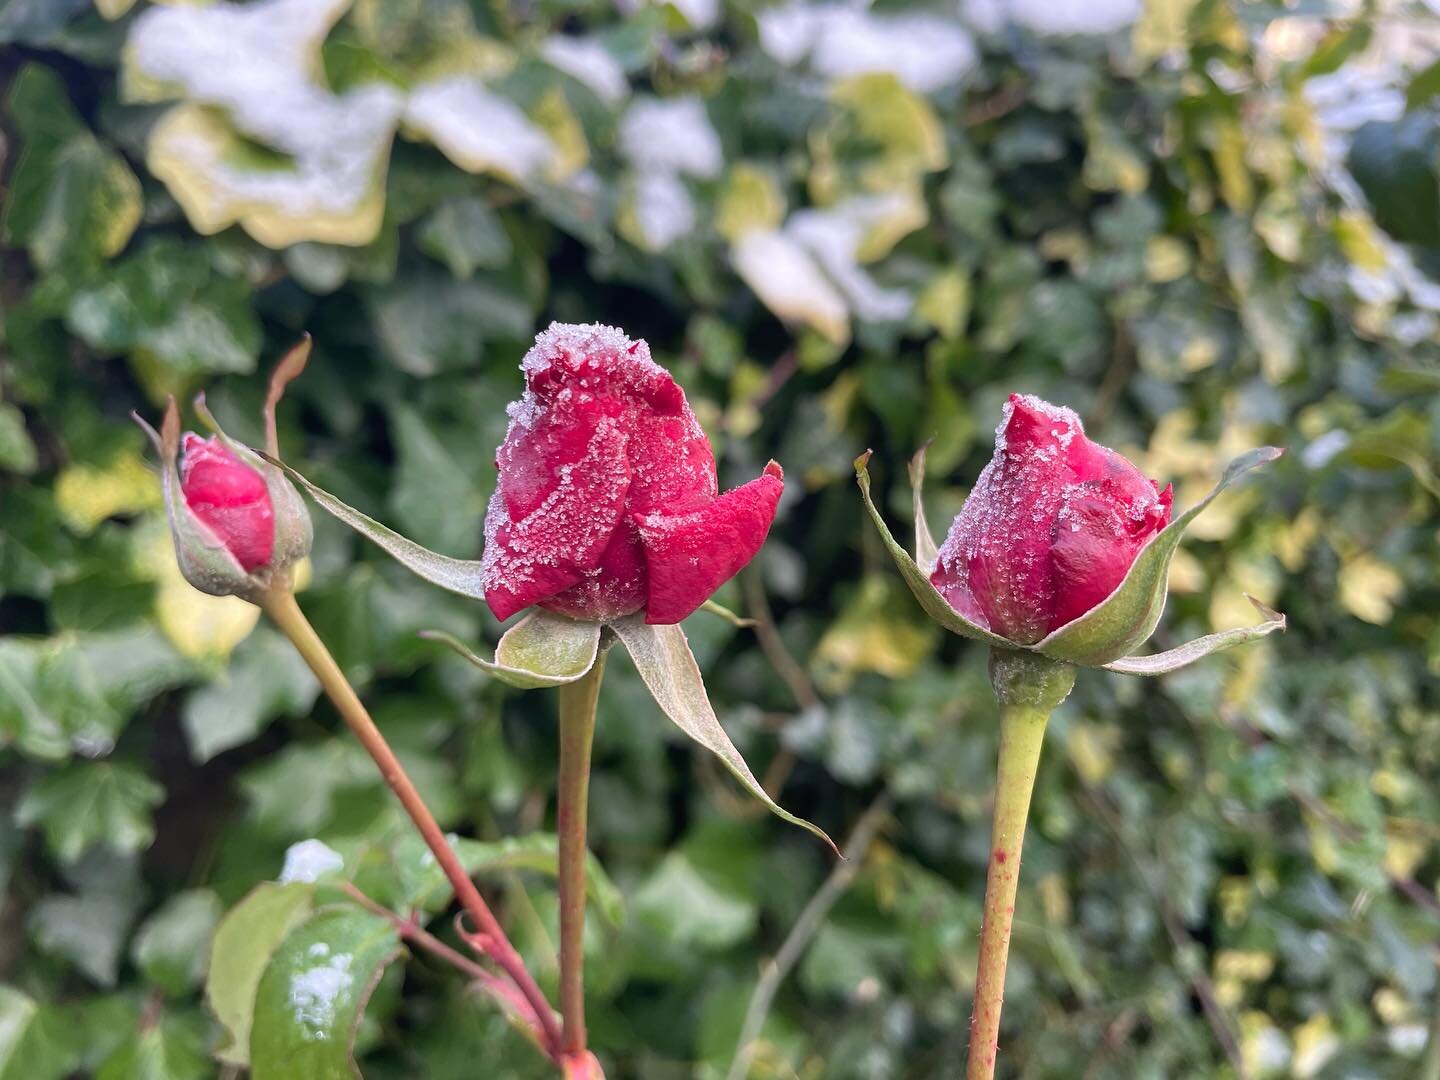 🌹 Frozen rose buds - Where do you find beauty in the frost and in winter? ❄️